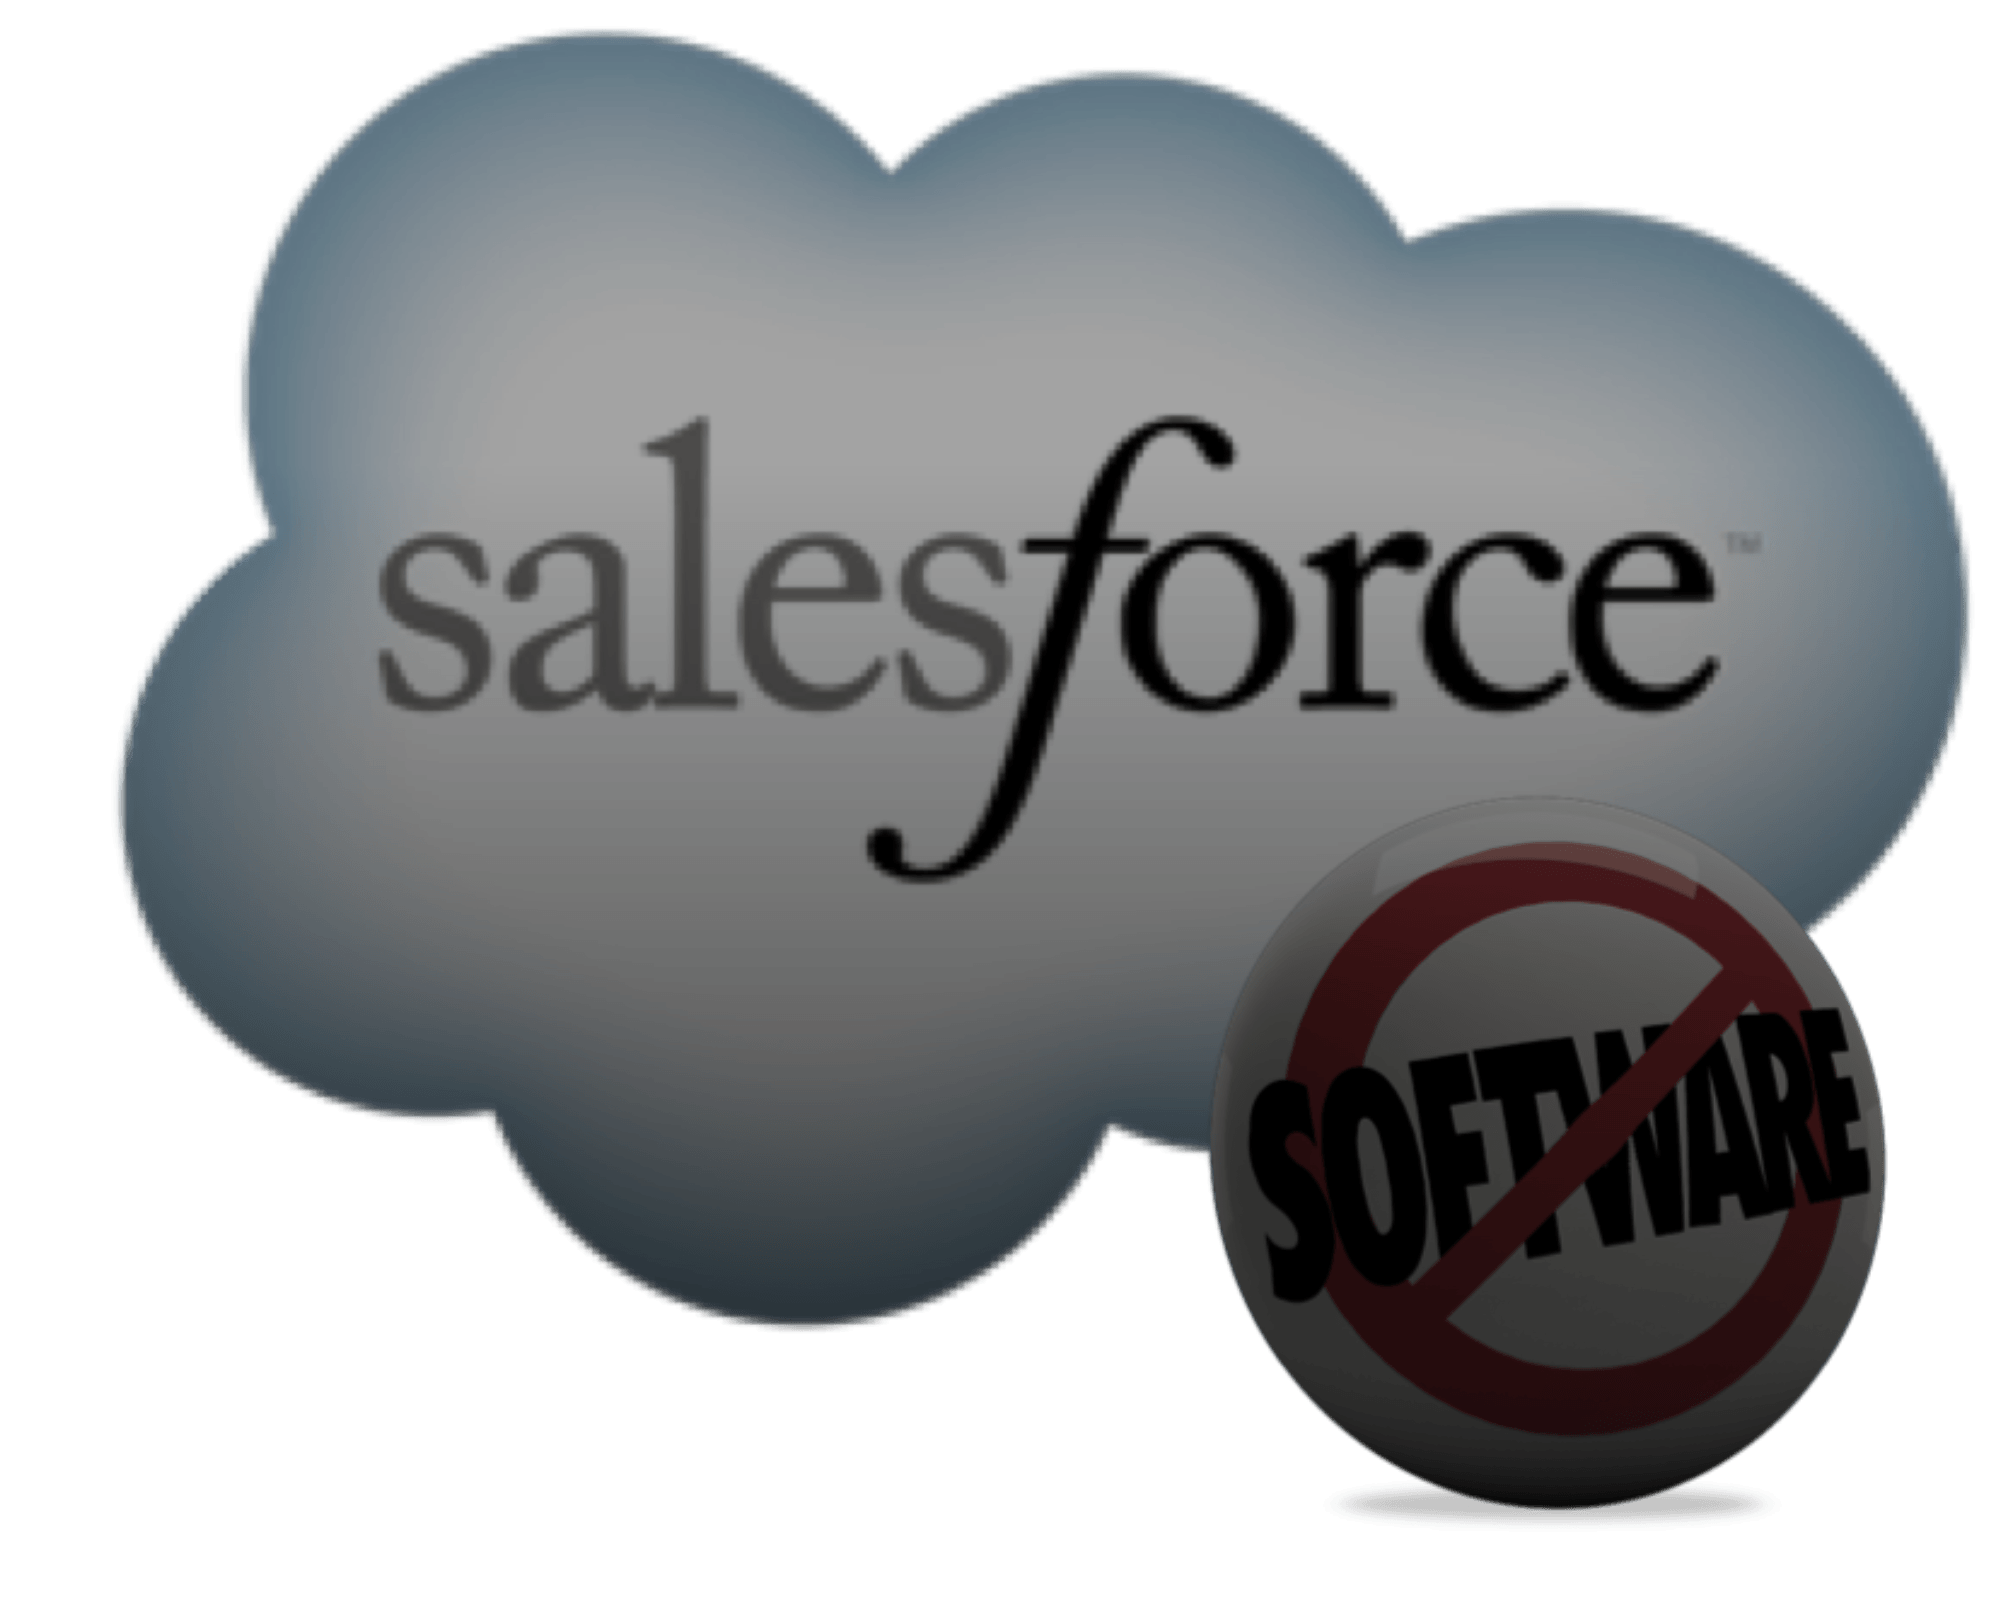 Salesforce.com CRM Logo - Confused - “What is Salesforce.com?” / “Why should I use Salesforce